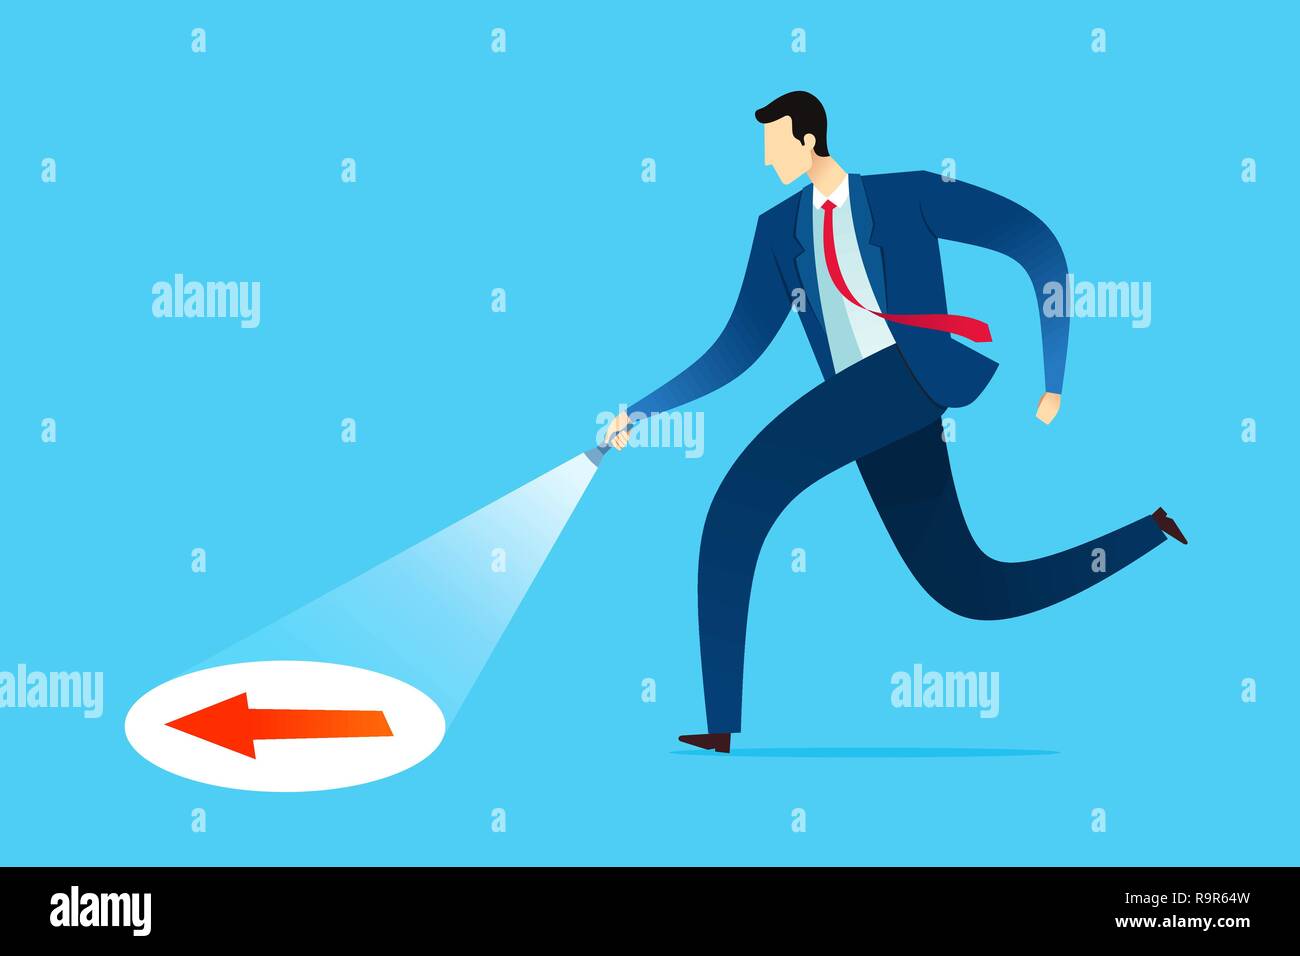 Businessman searching guidance for new opportunity and solution. Business concept vector illustration. Stock Vector